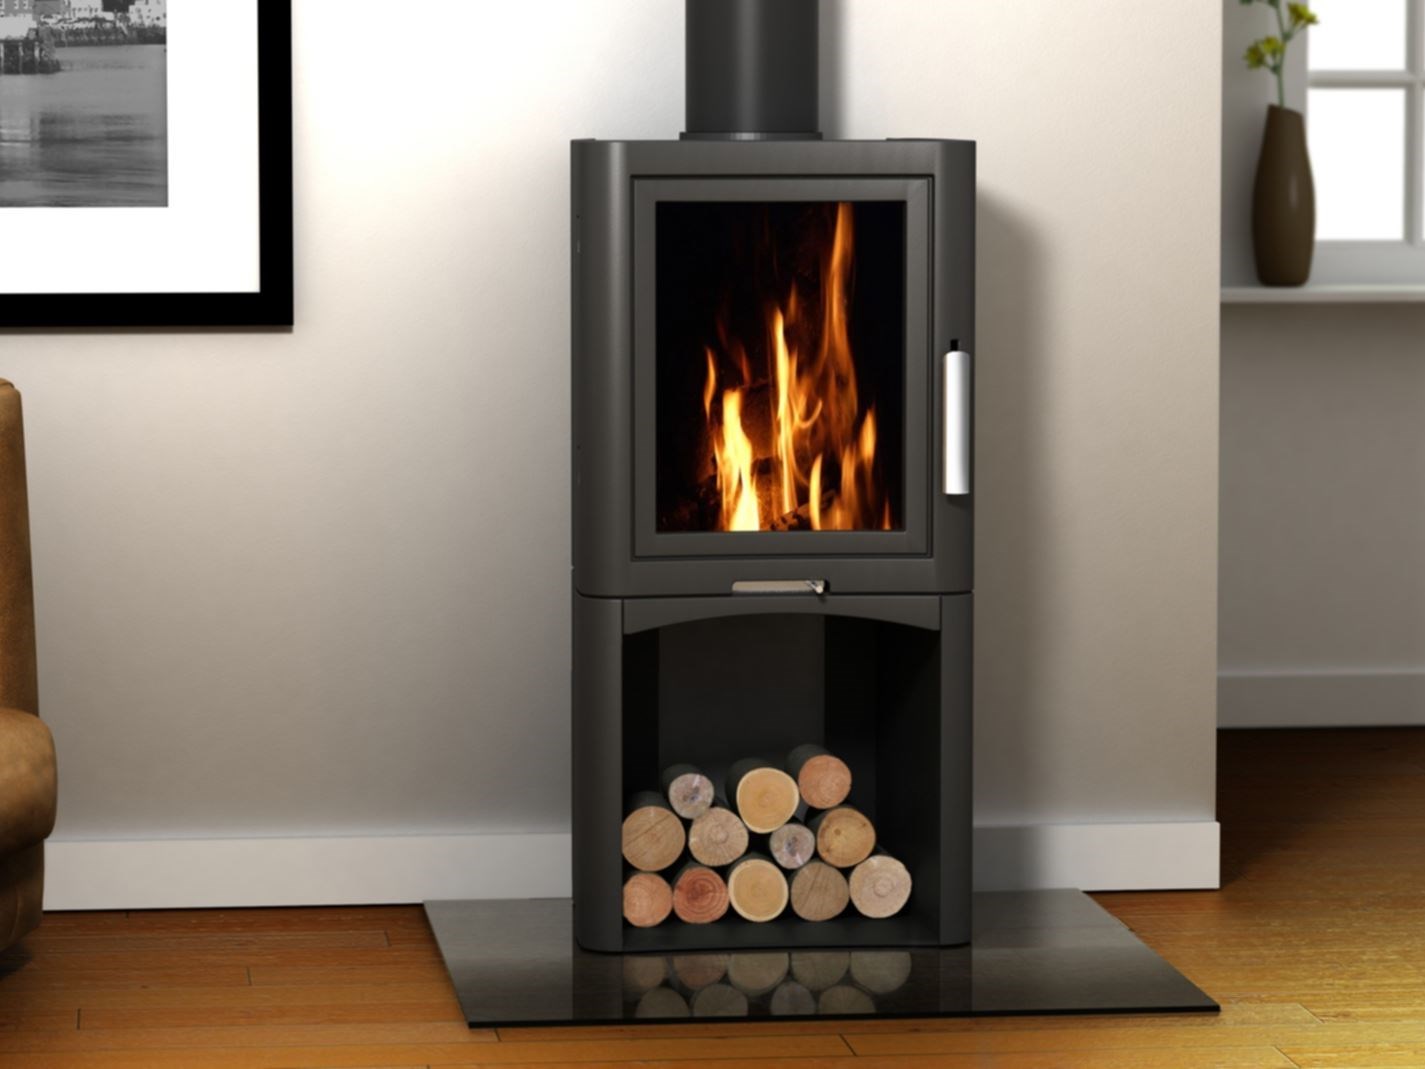 There is an on-going row over wood burning stoves which is yet to be resolved.